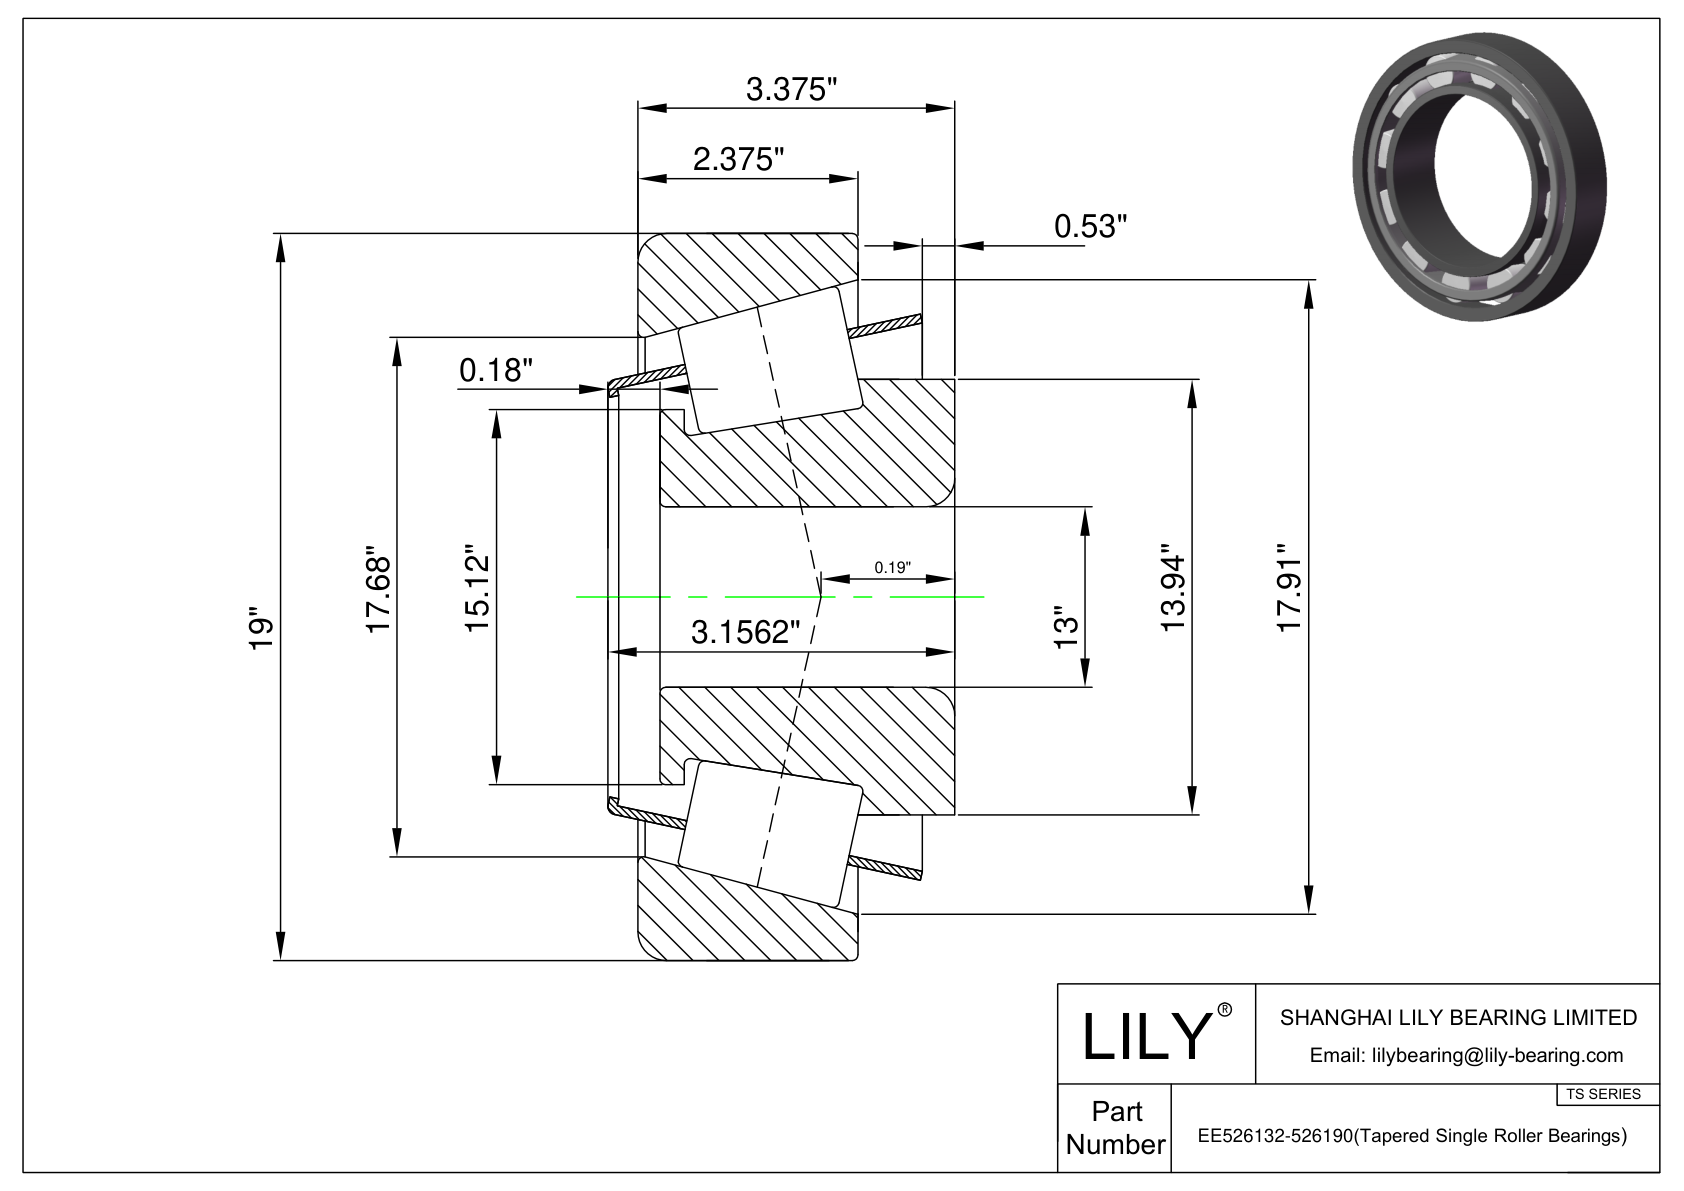 EE526132-526190 TS (Tapered Single Roller Bearings) (Imperial) cad drawing